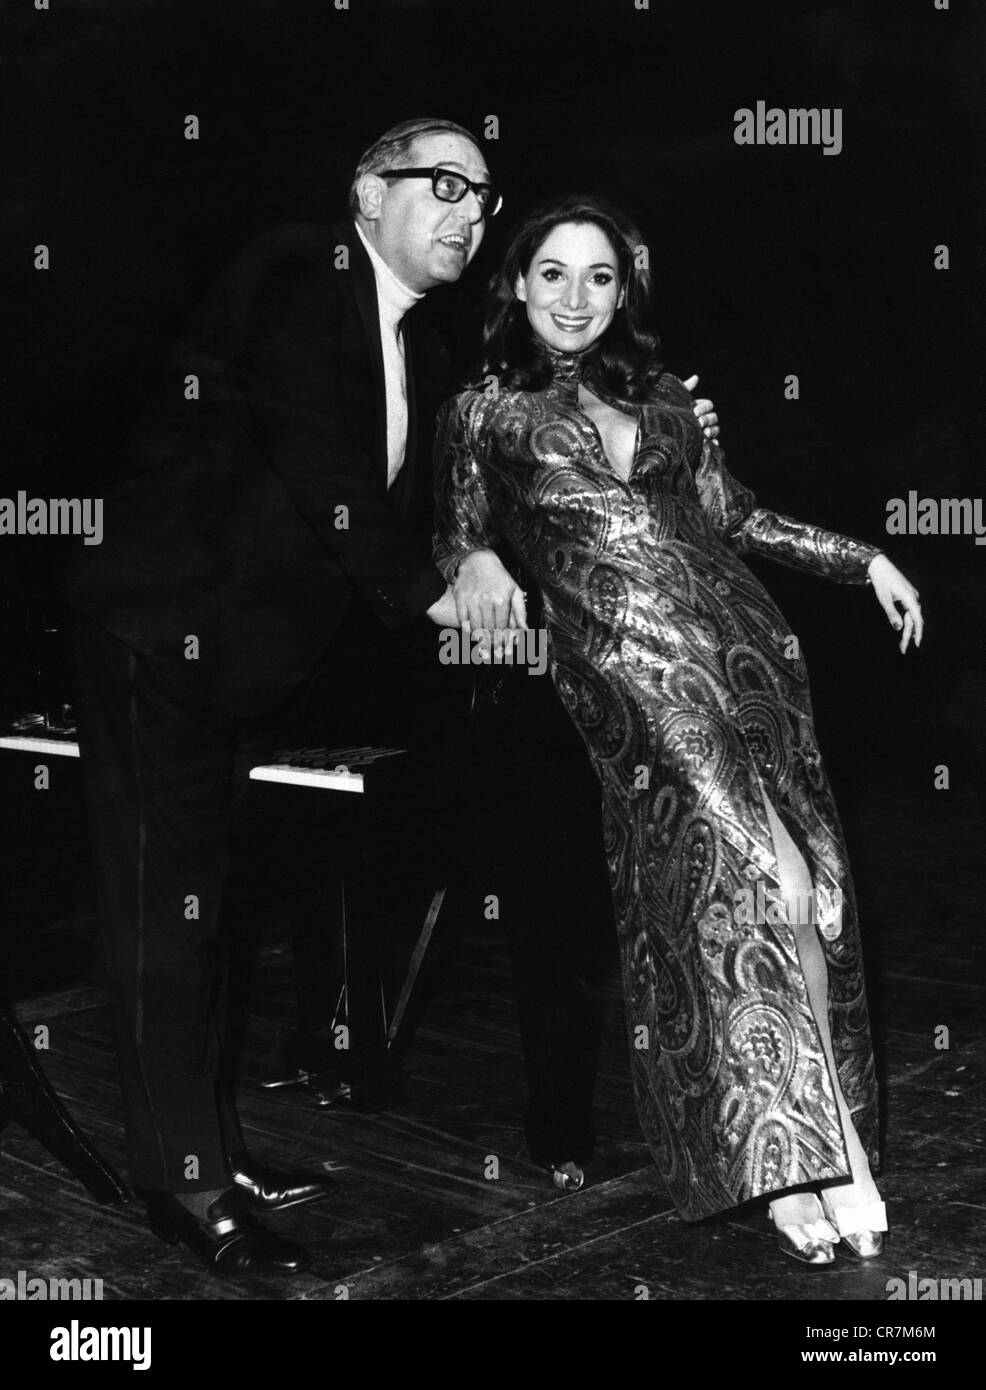 Kreisler, Georg, 18.7.1922 - 22.11.2011, Austrian-American cabarettist, with wife Topsy Kueppers, 1970s, Stock Photo